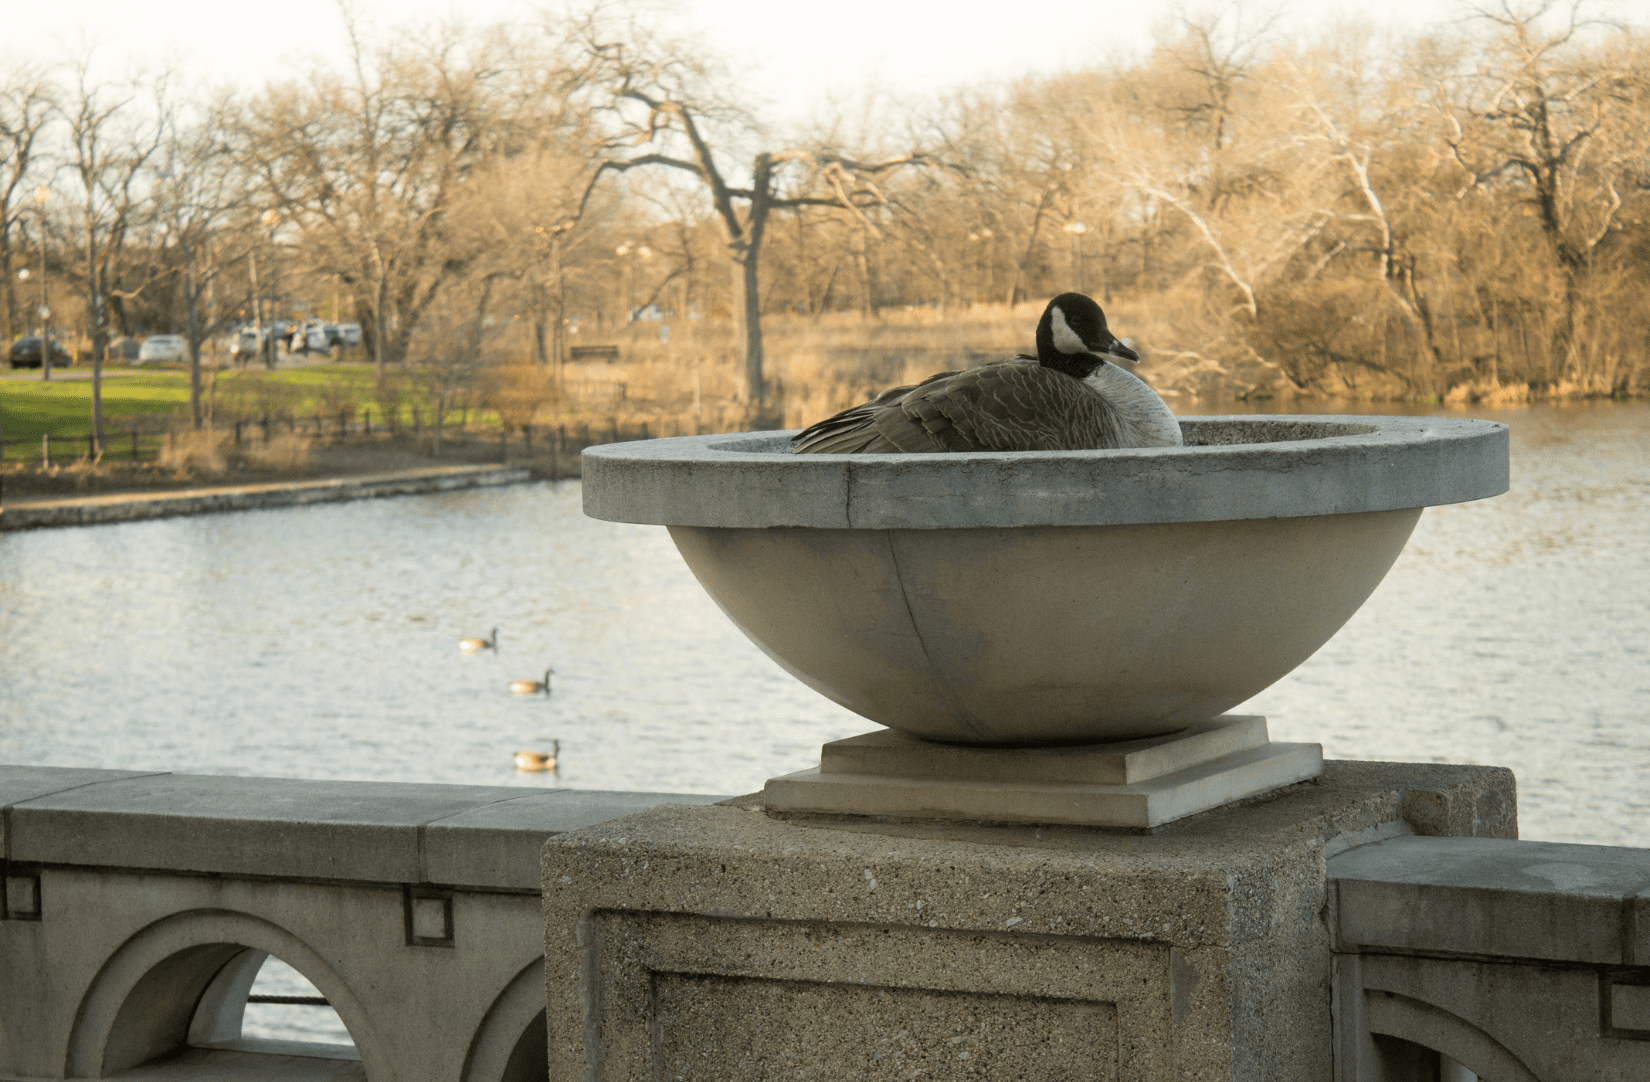 Canada goose nesting in cement basin in a park